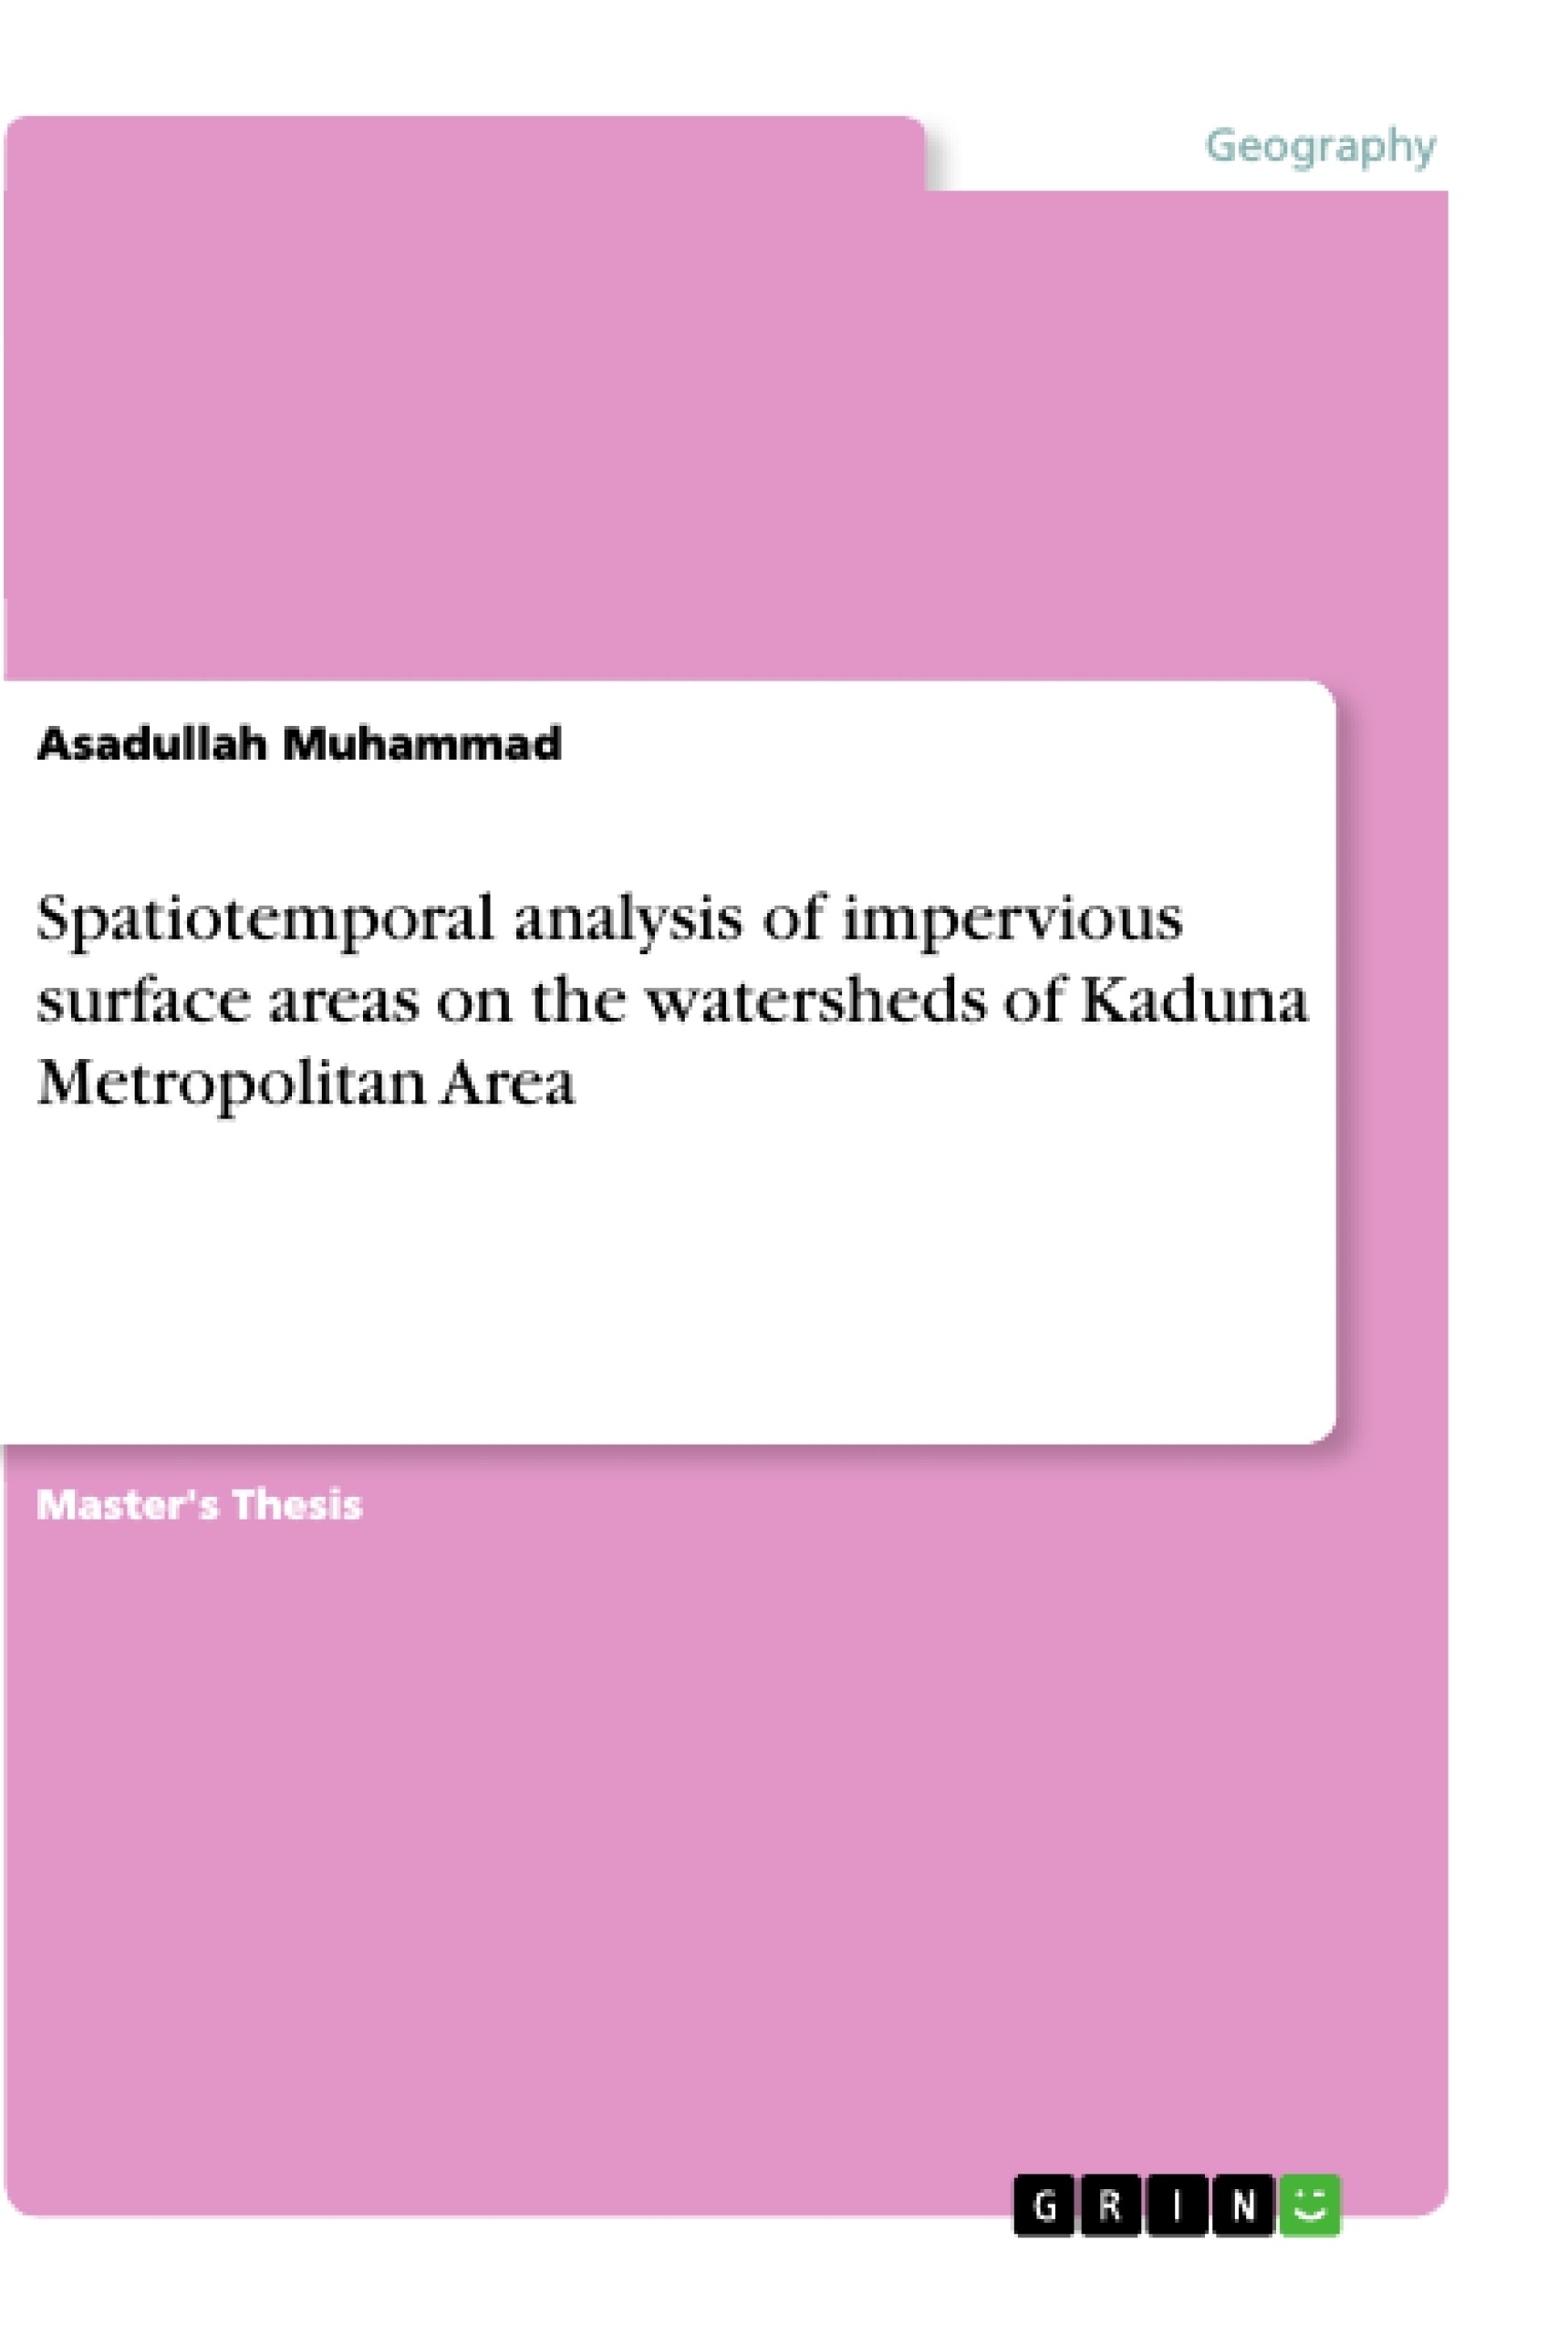 Title: Spatiotemporal analysis of impervious surface areas on the watersheds of Kaduna Metropolitan Area